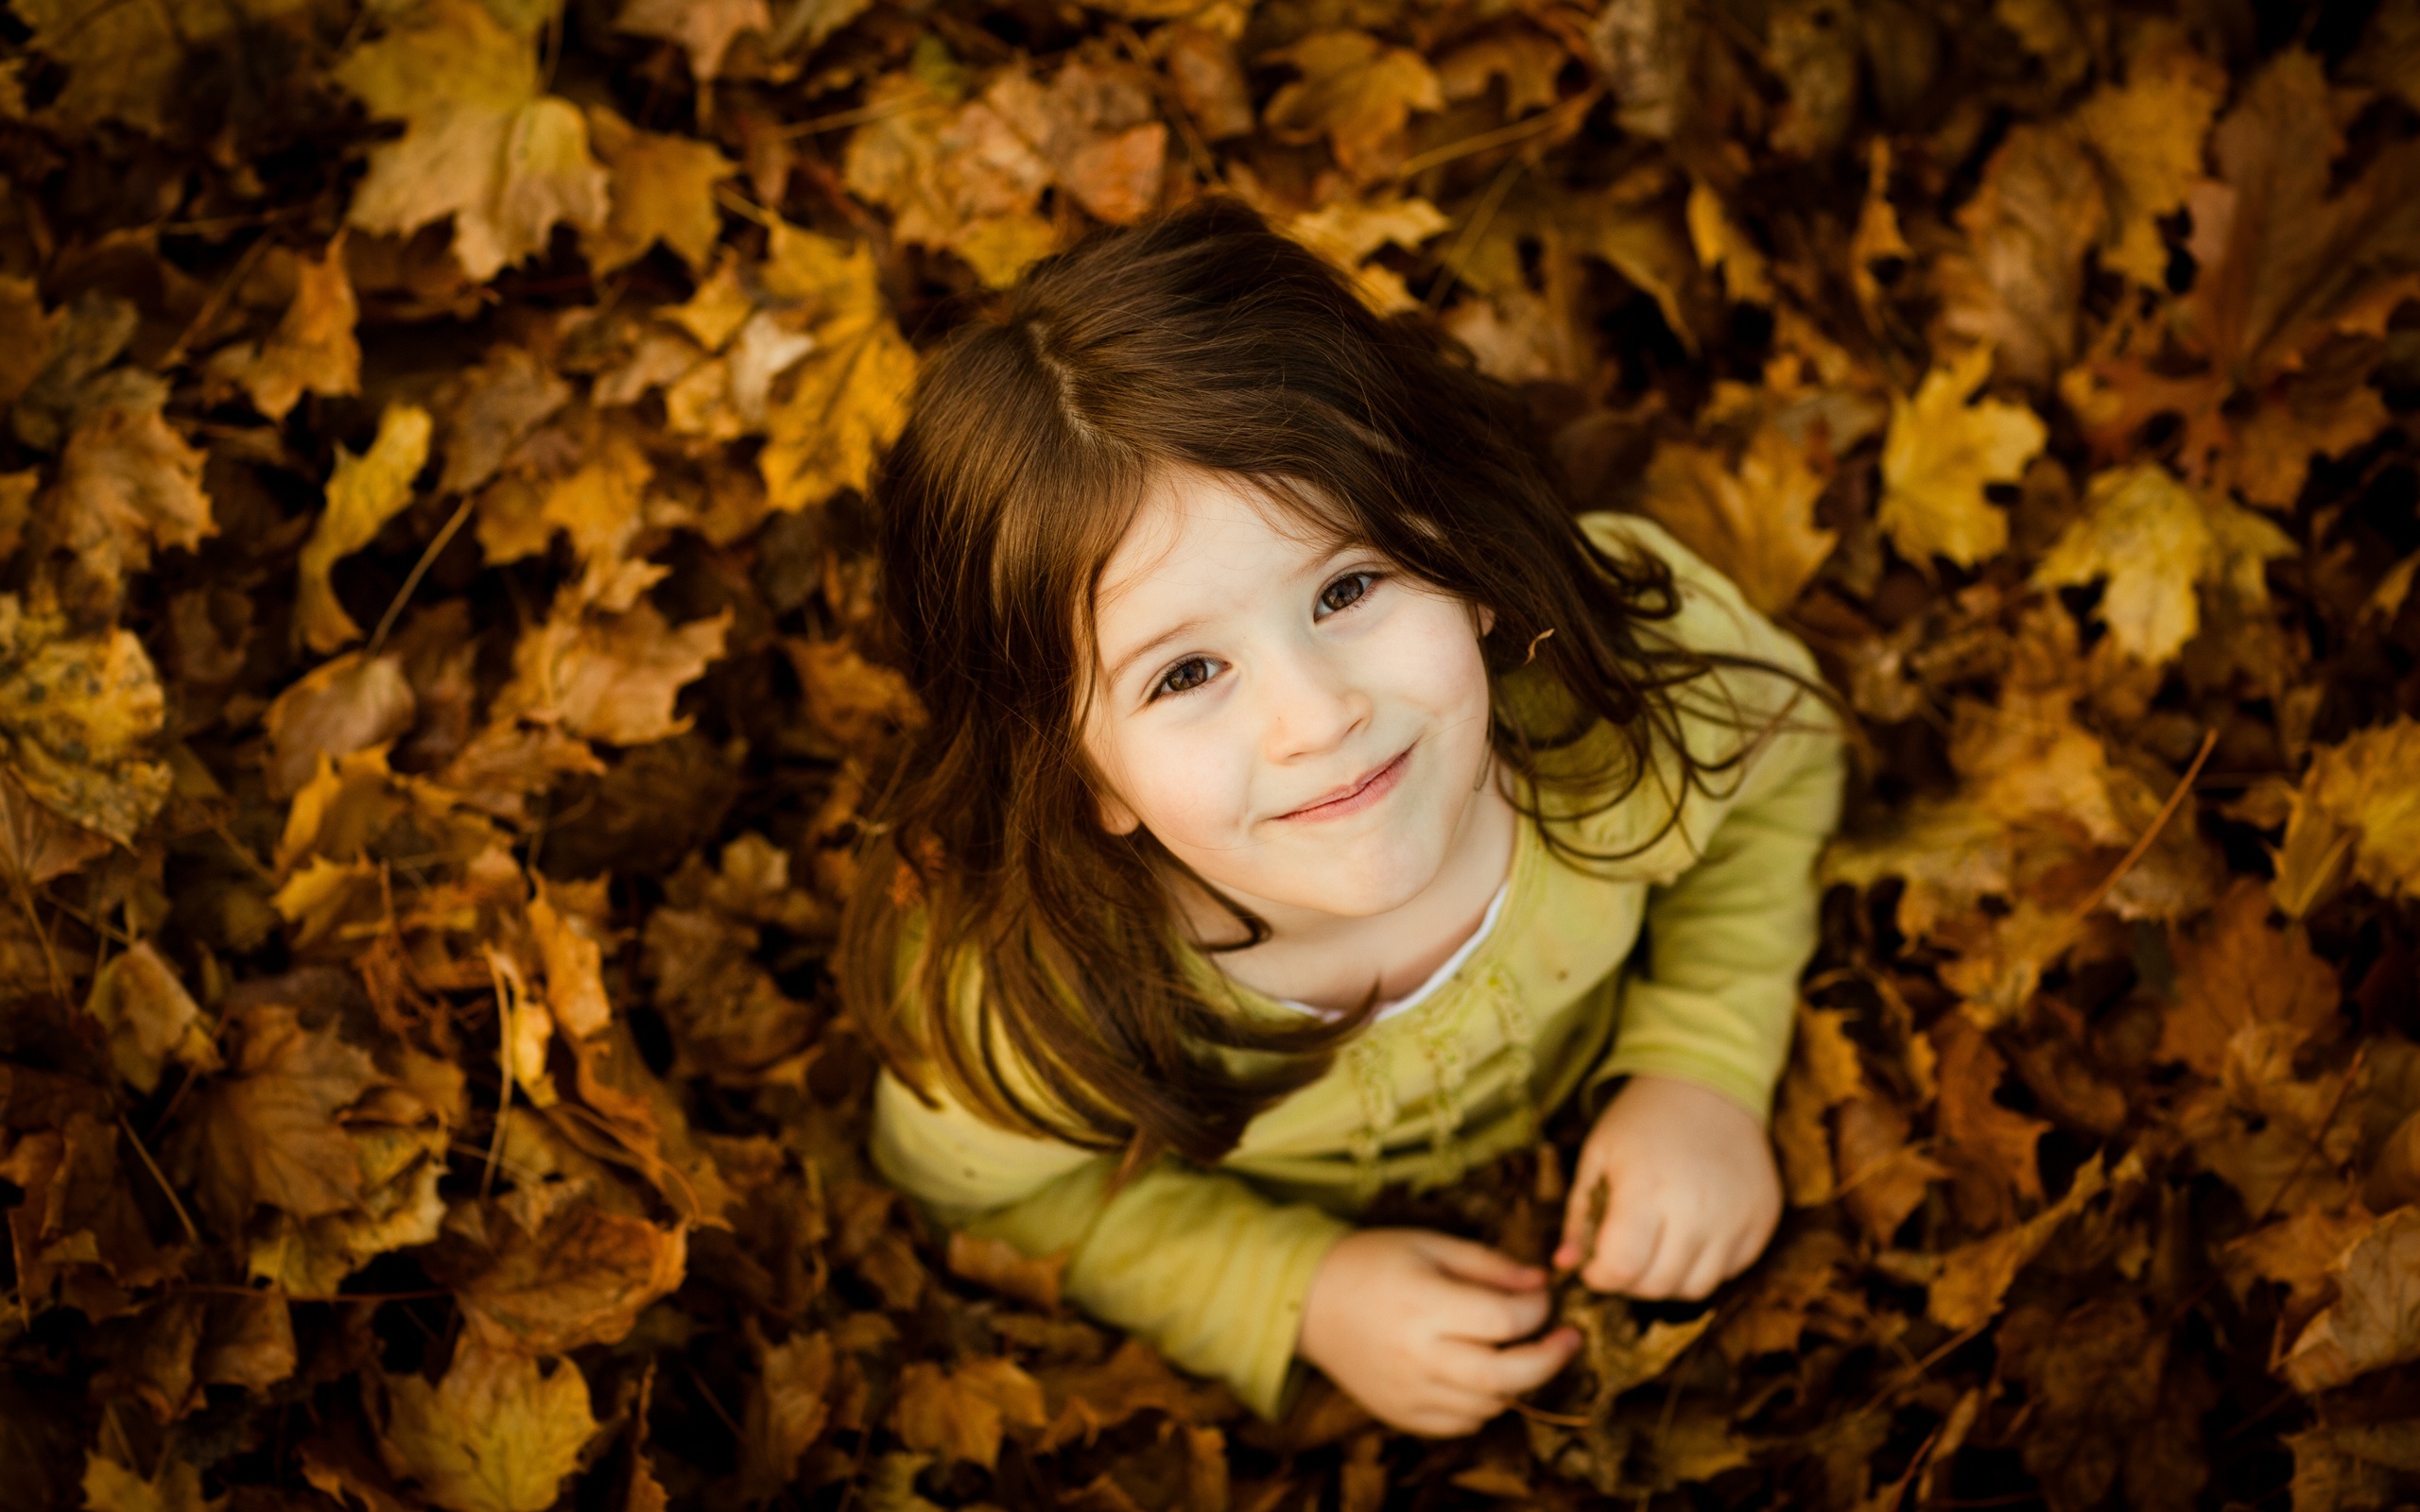 baby photos wallpapers,people in nature,leaf,yellow,beauty,autumn